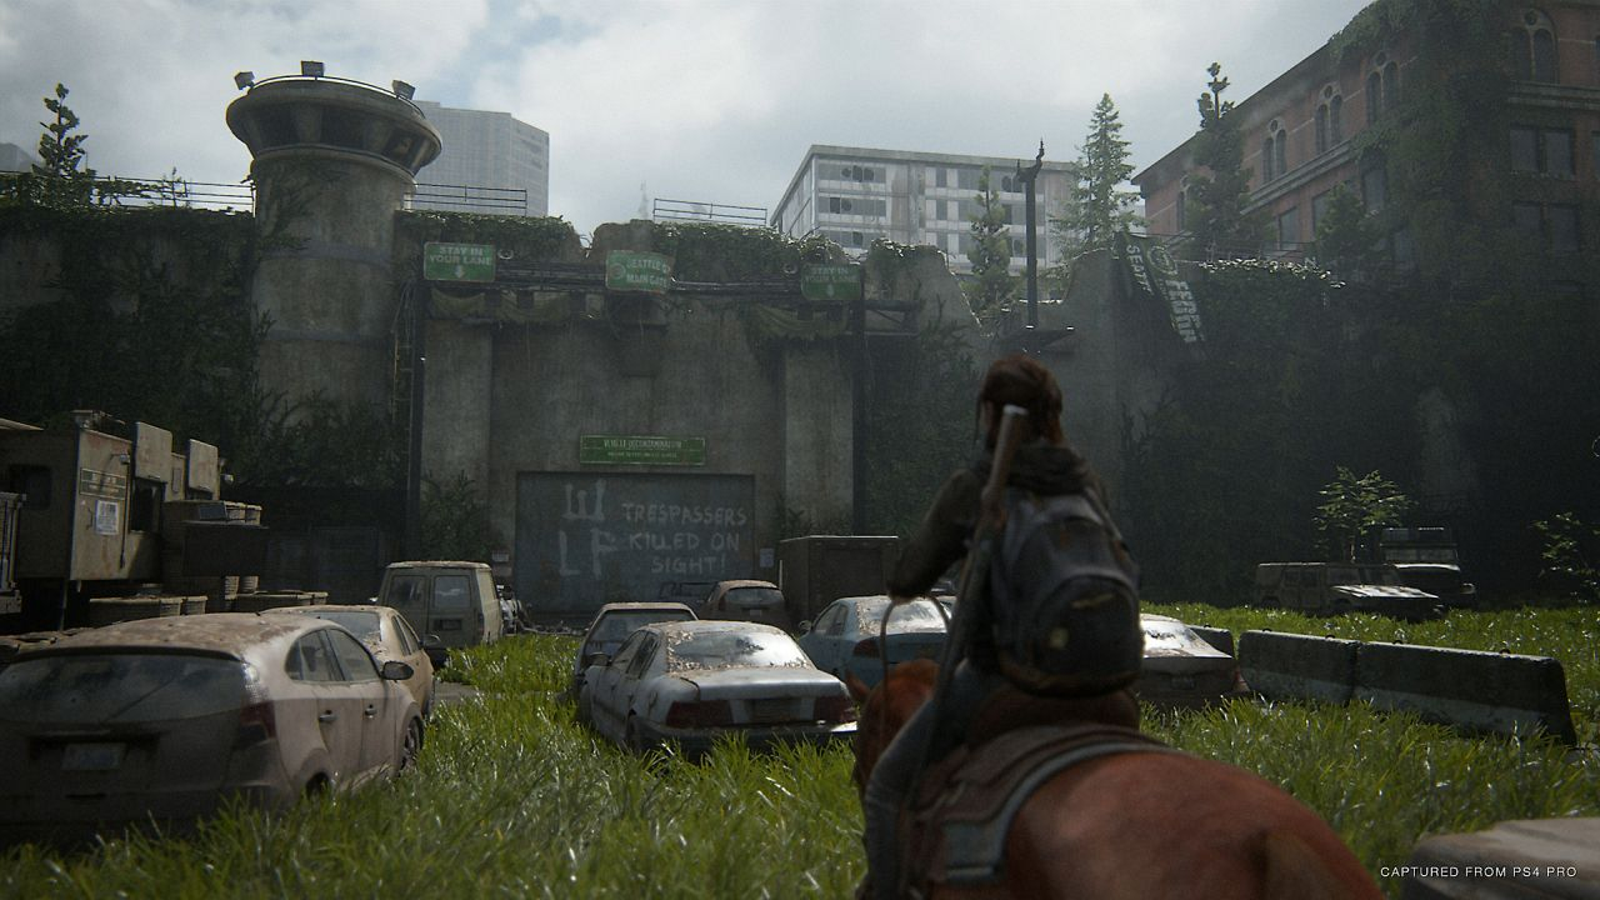 The Last of Us Part I for PC Launching “Very Soon” After PS5 Version Says  Naughty Dog Dev